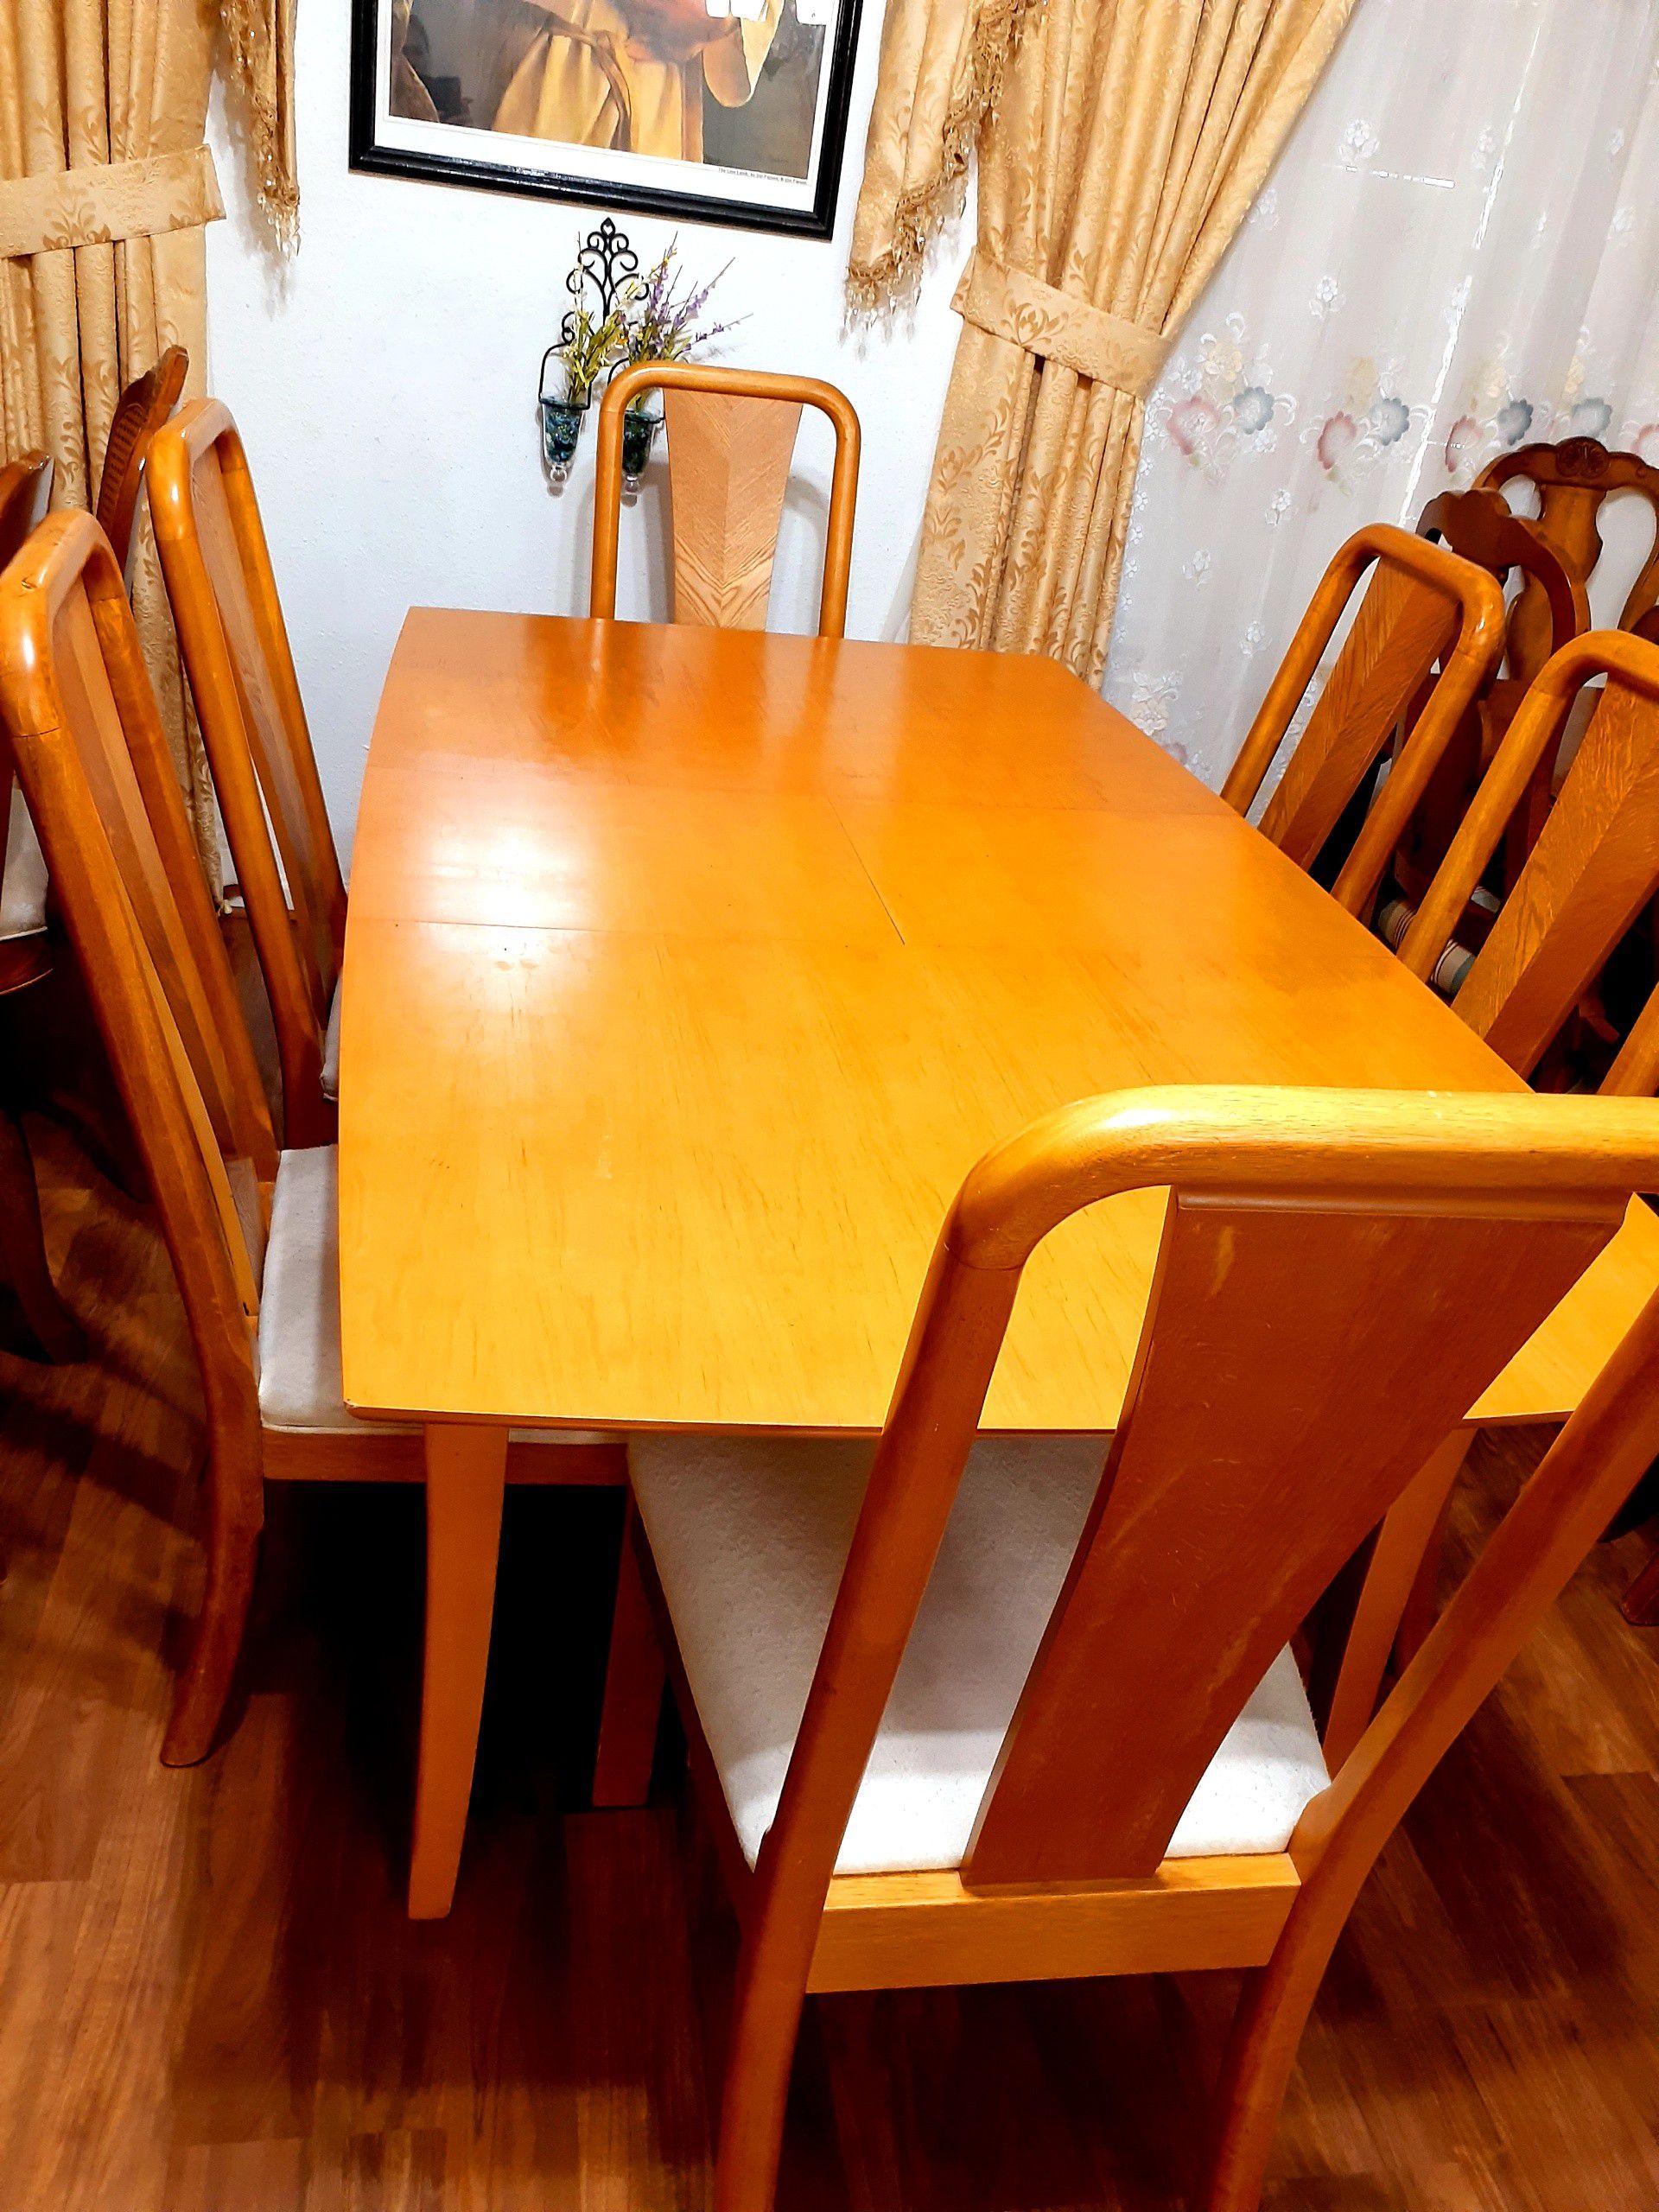 Beautiful wood dining room table with 6 chairs. Good condition and clean. Table has a leaf. .